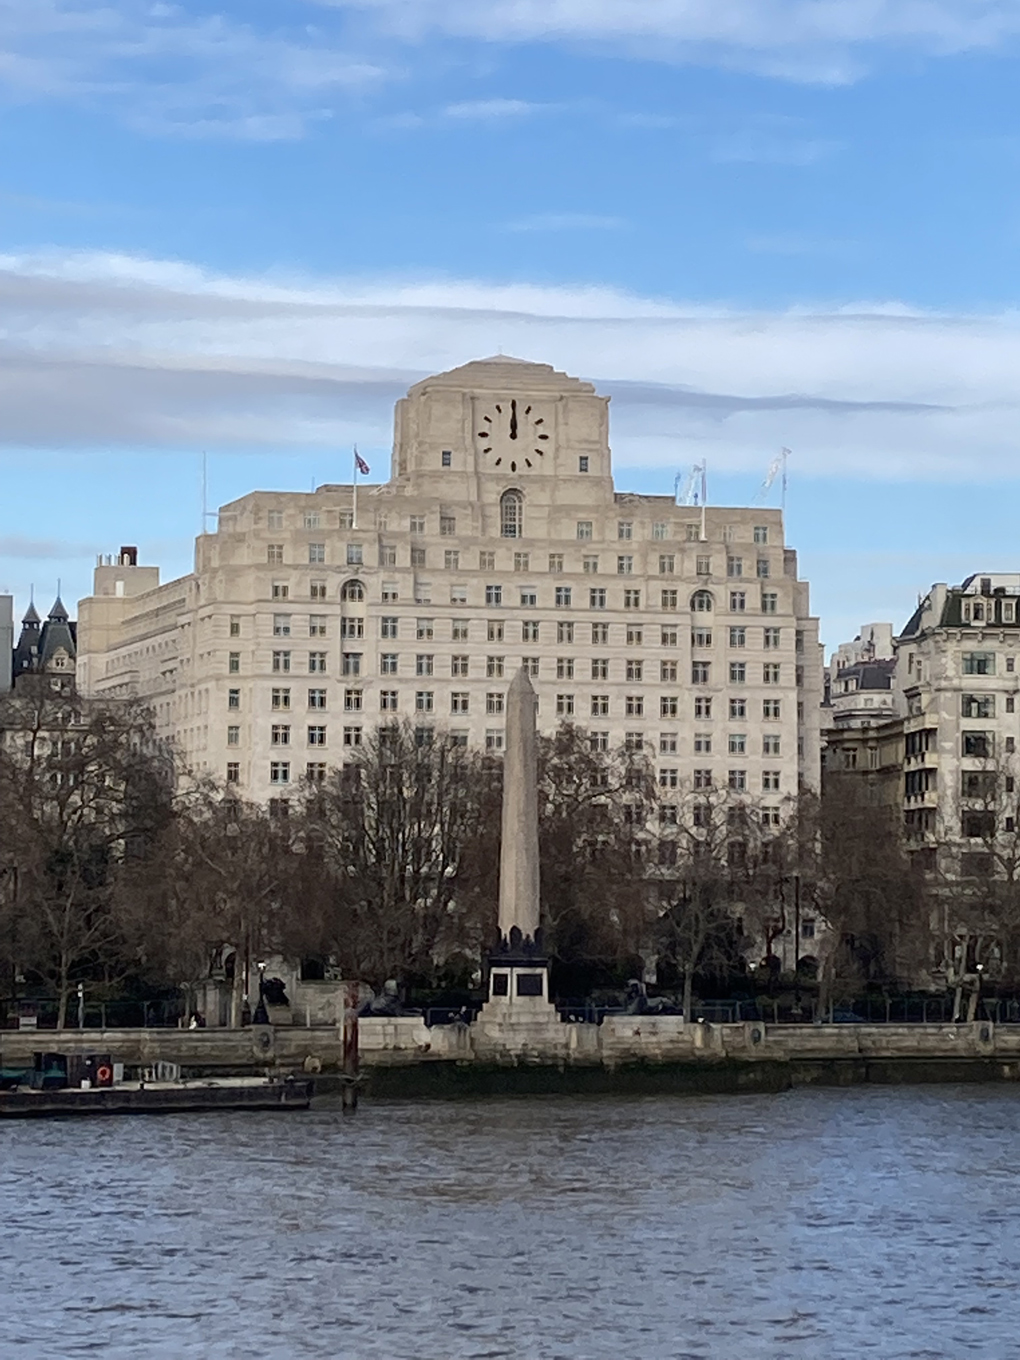 We see an Art Deco building across the Thames from South Bank inLondon